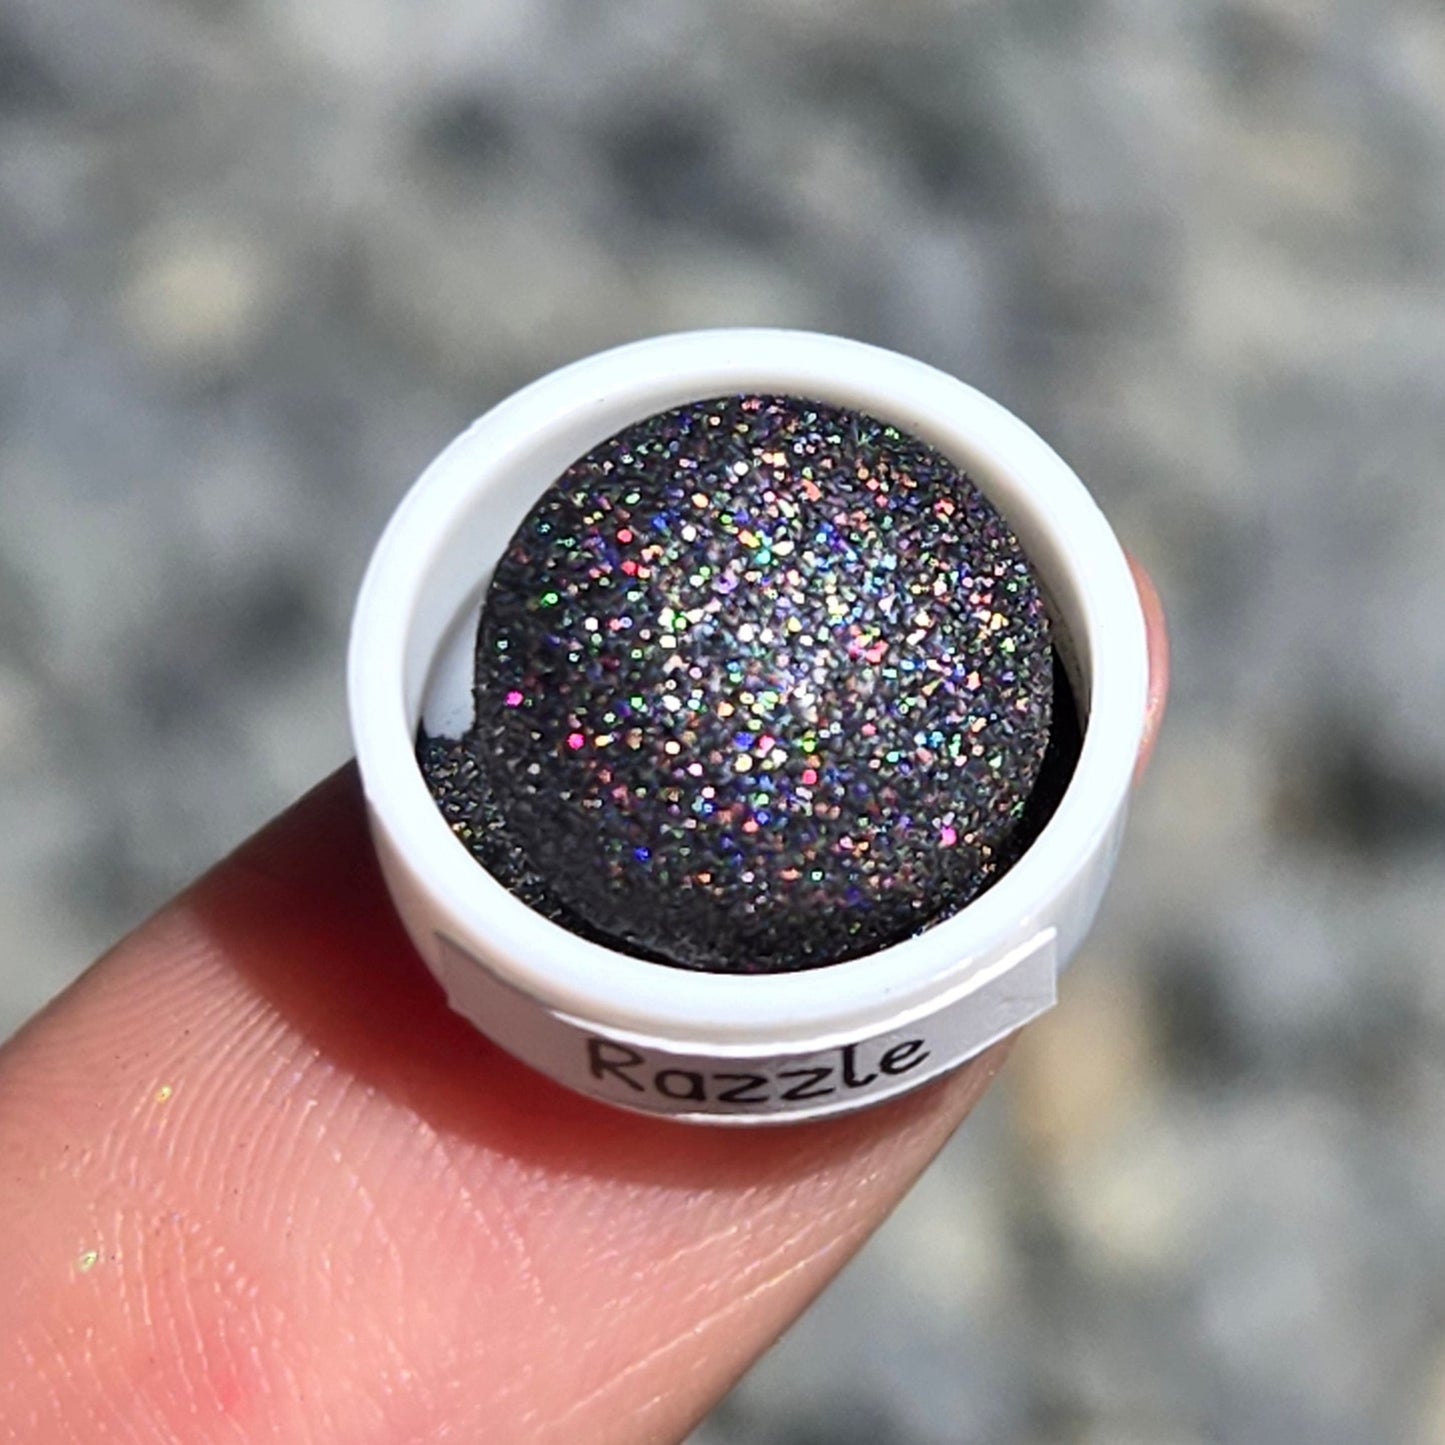 Razzle Hologram Handmade Watercolor Shimmer Paints by iuilewatercolors